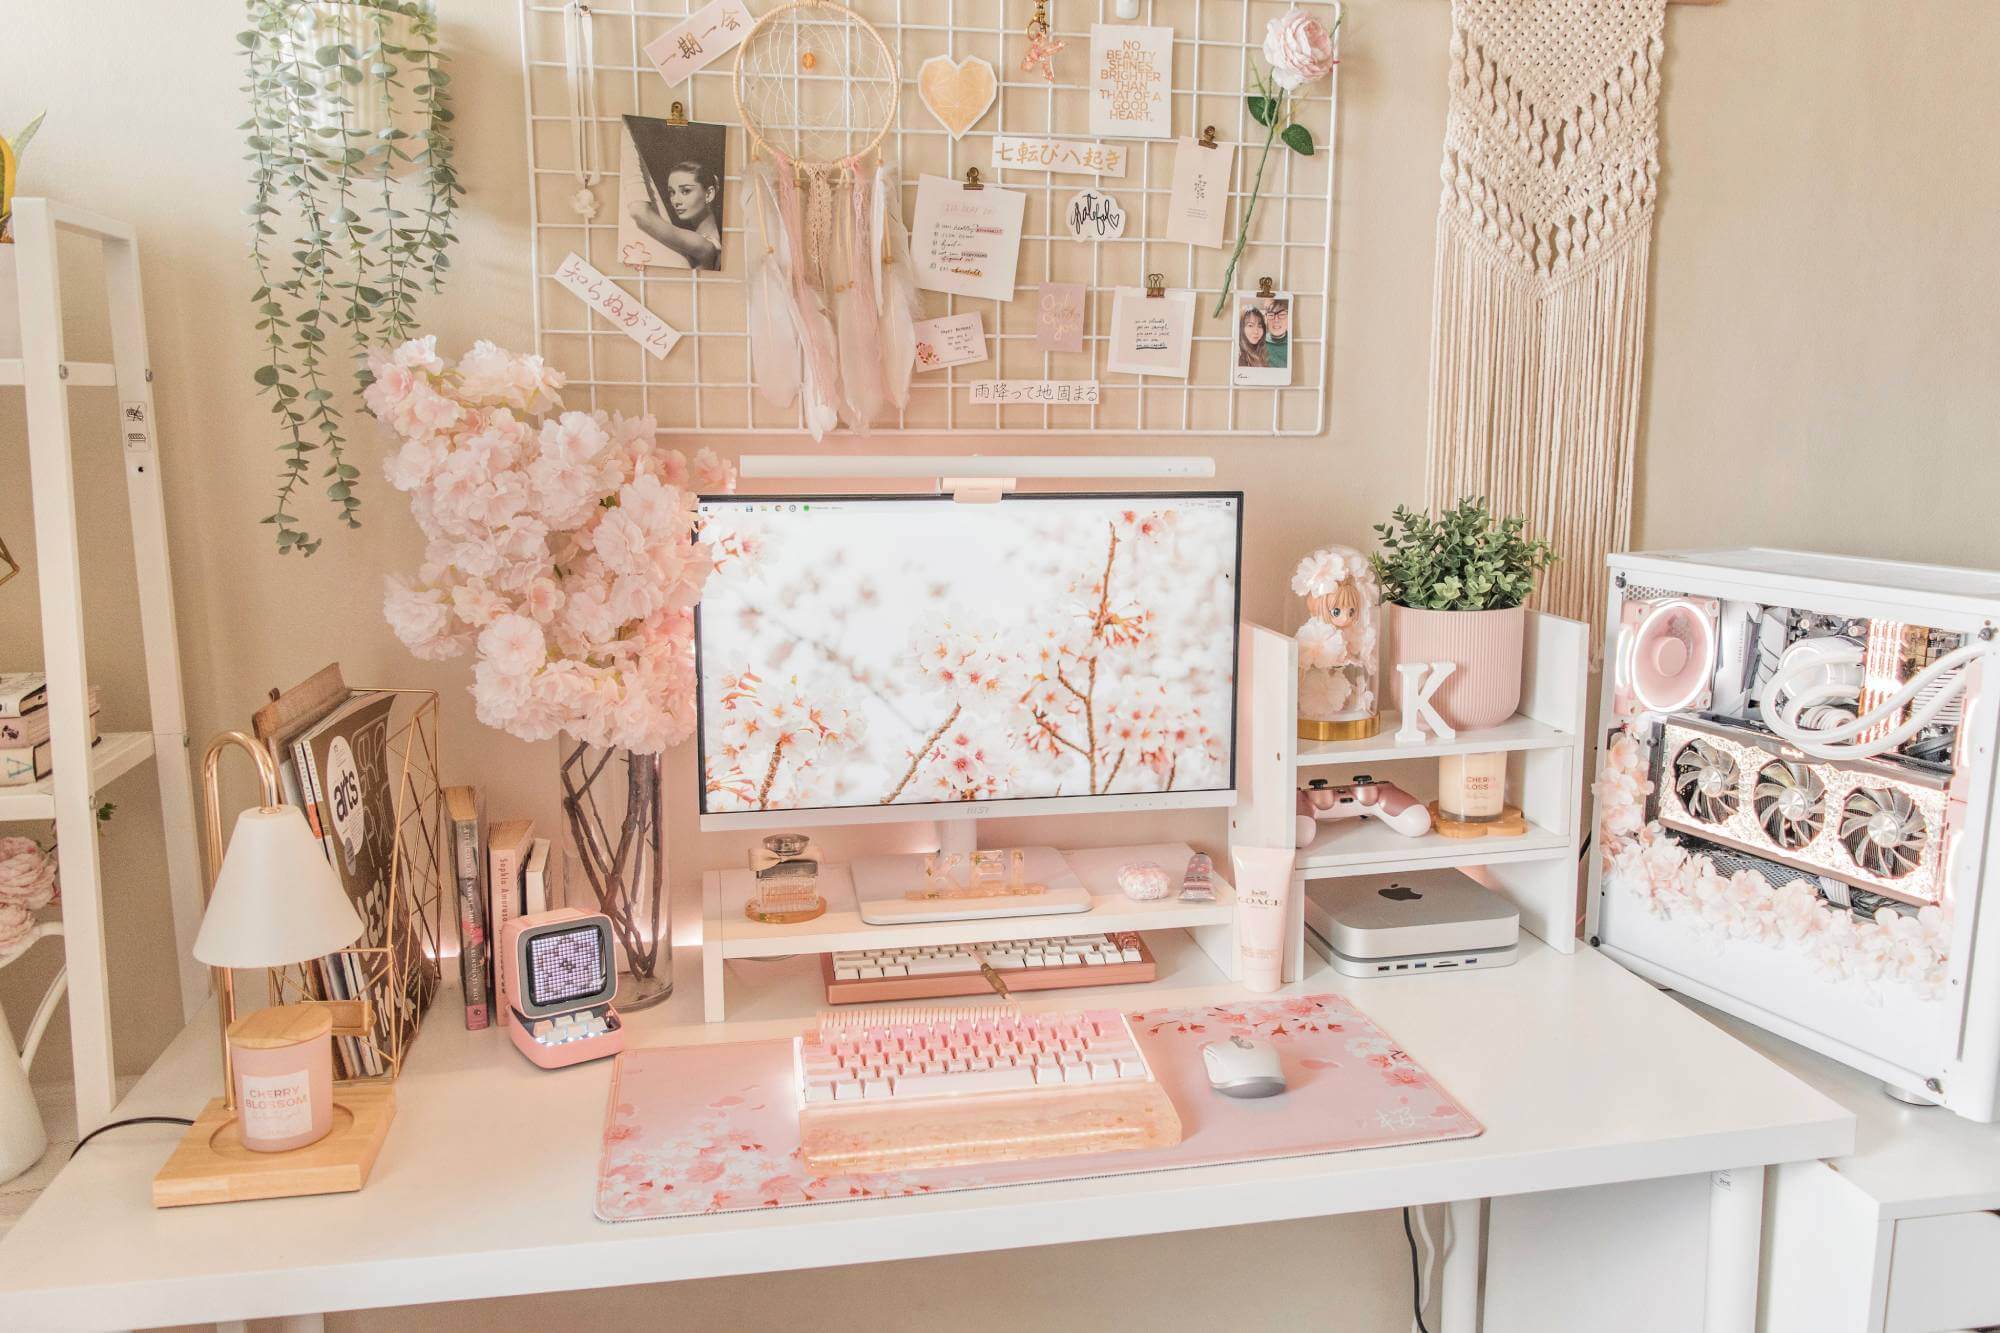 A dreamy desk setup in pink colours